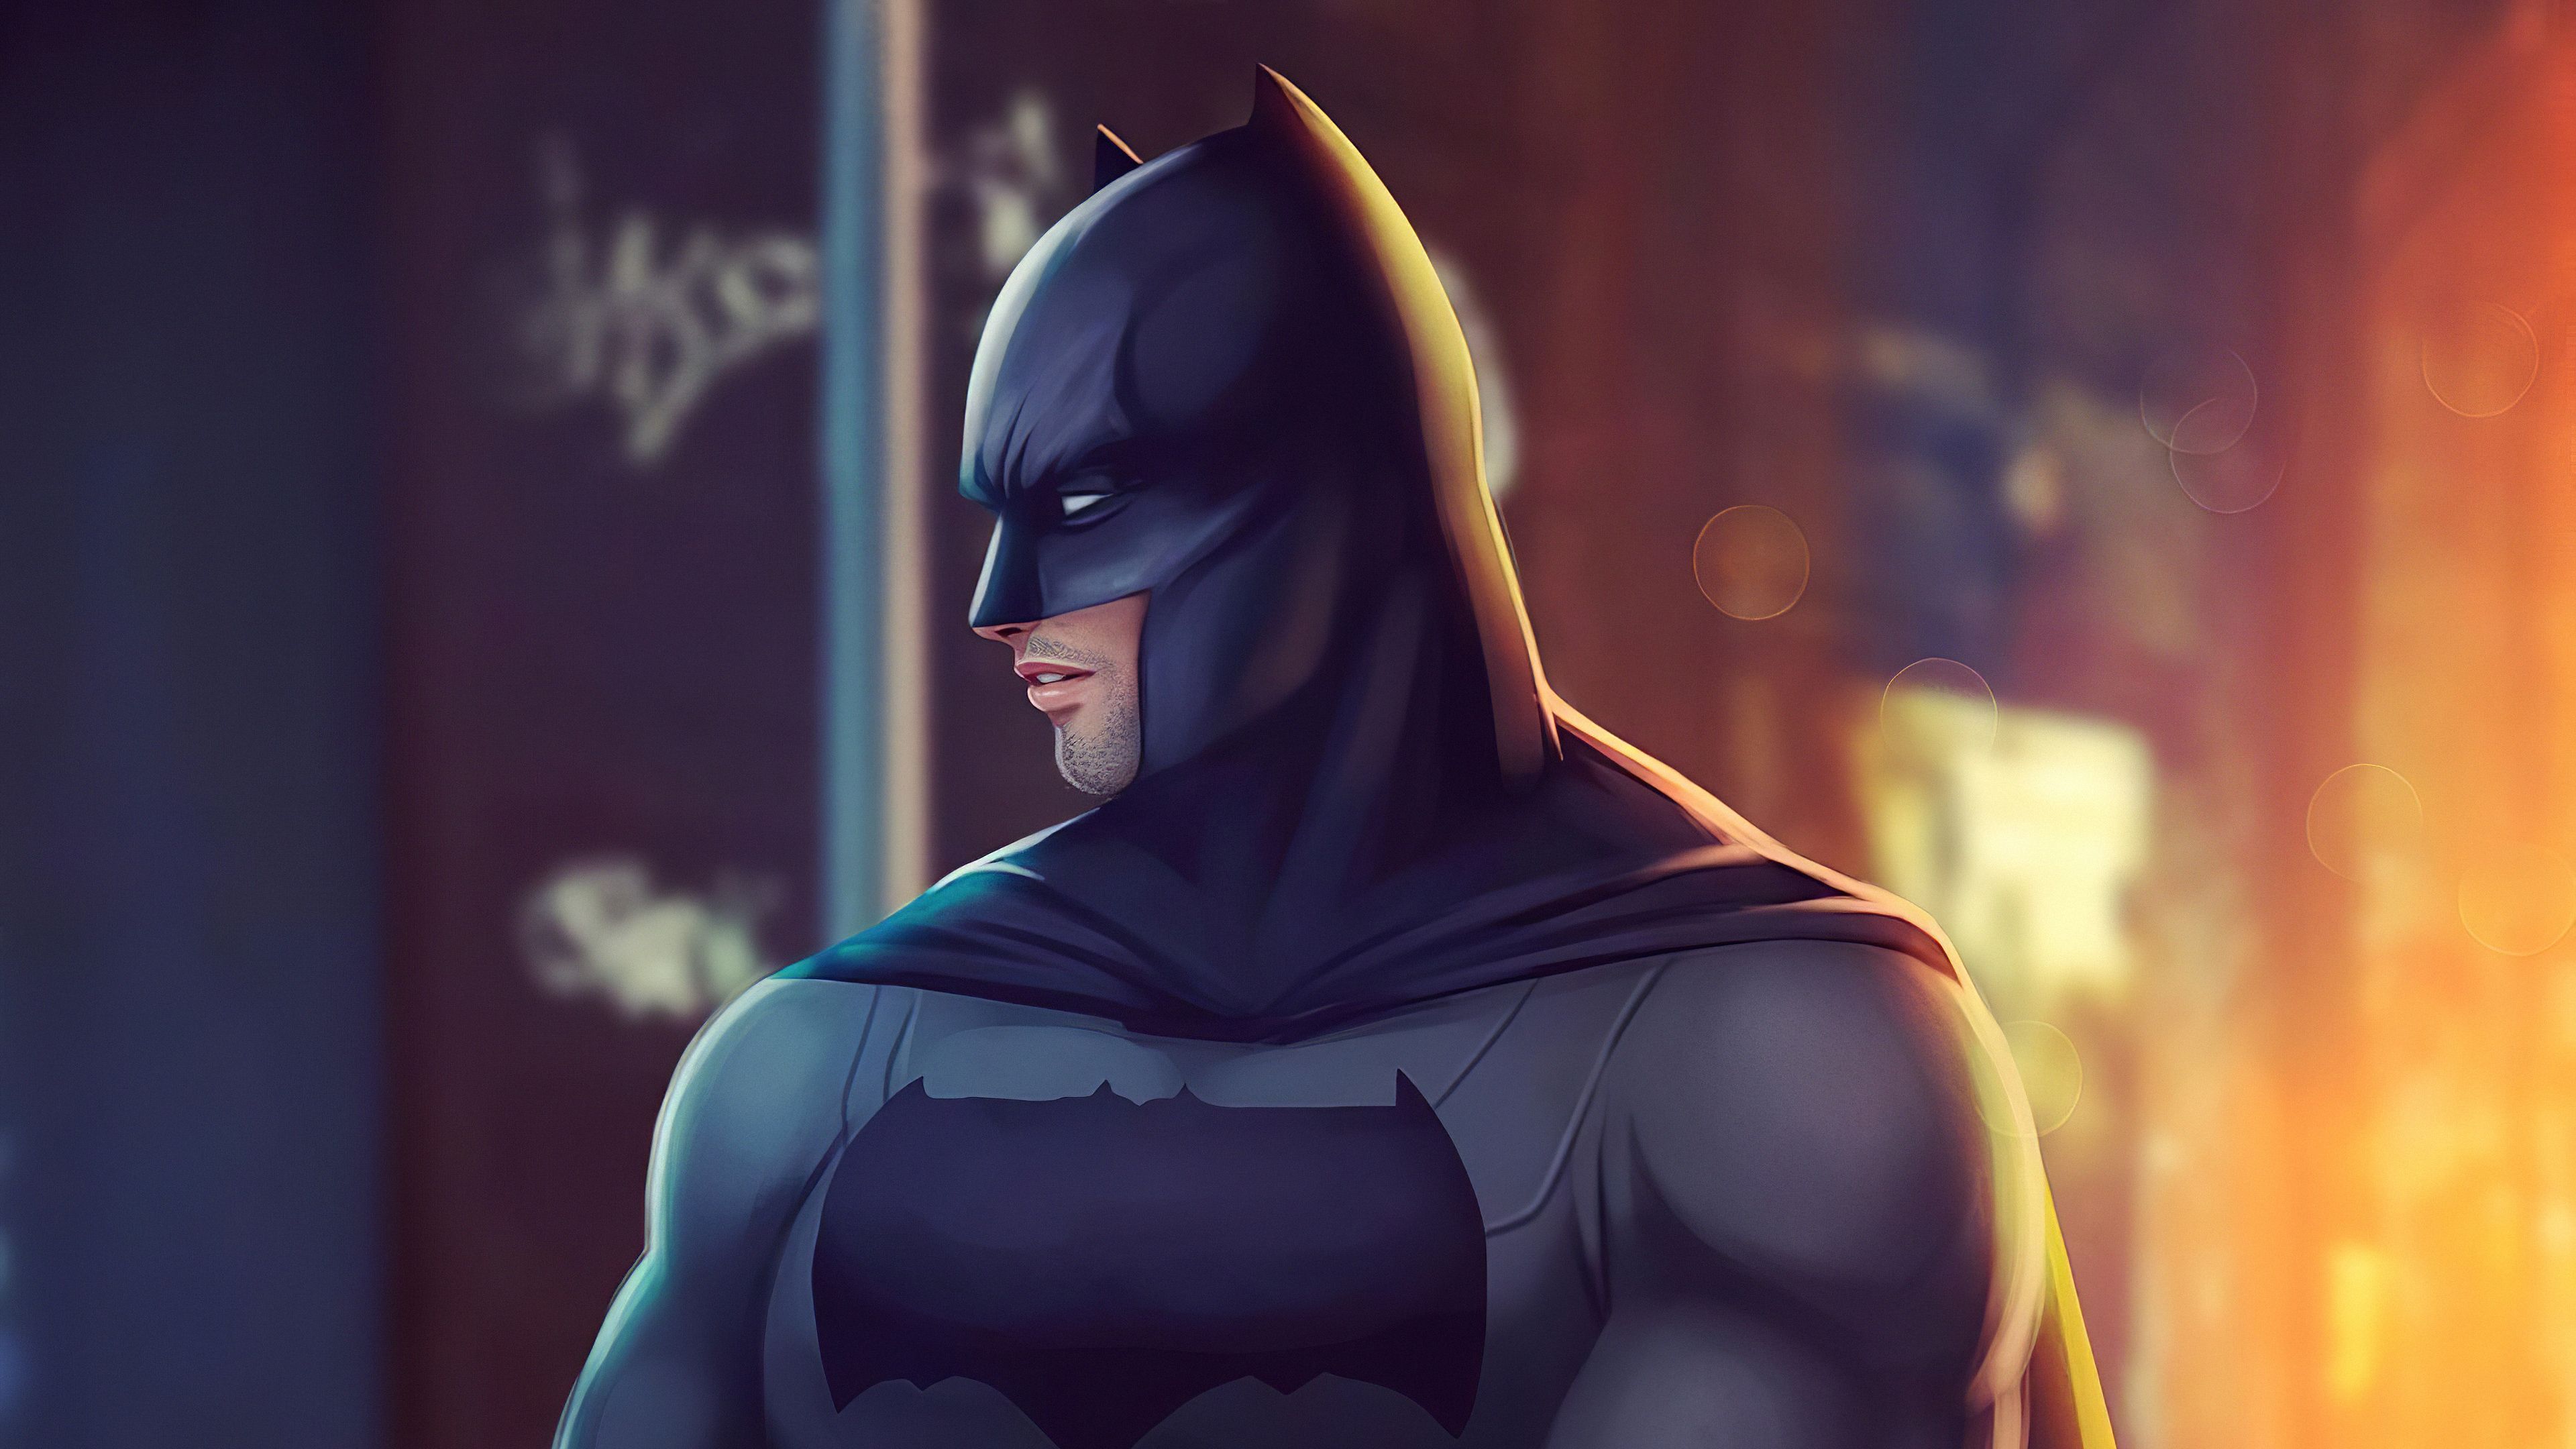 Batman Side Face, HD Superheroes, 4k Wallpaper, Image, Background, Photo and Picture